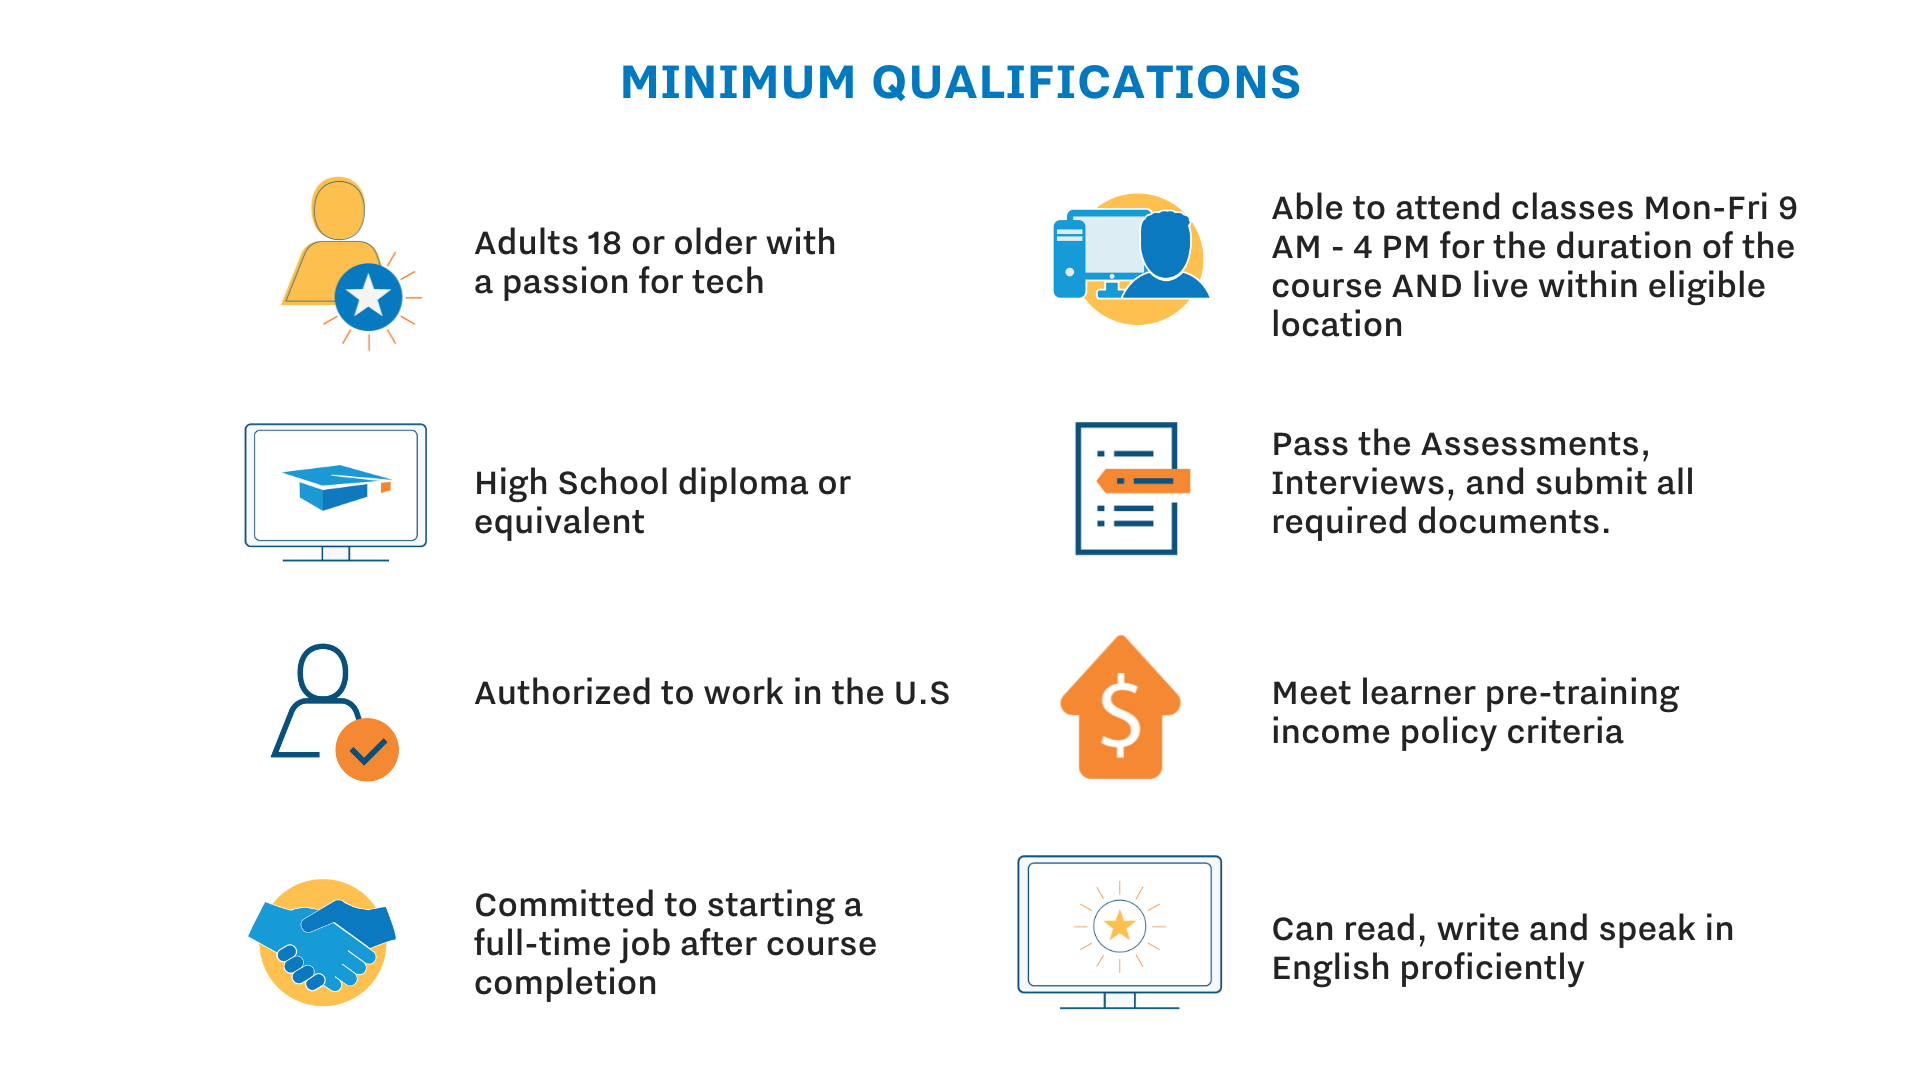 Minimum Eligibility: - Adults 18 or older with a passion for tech - HS diploma or equivalent - Authorized to work in the US -Committed to starting a FT job after course completion - Able to attend classes m-f 9-4 for duration of course and live within eligible location - Pass the assessment, interviews, and submit all required documentation - Meet learner pre-training income policy -can read, write, and speak in English proficiently